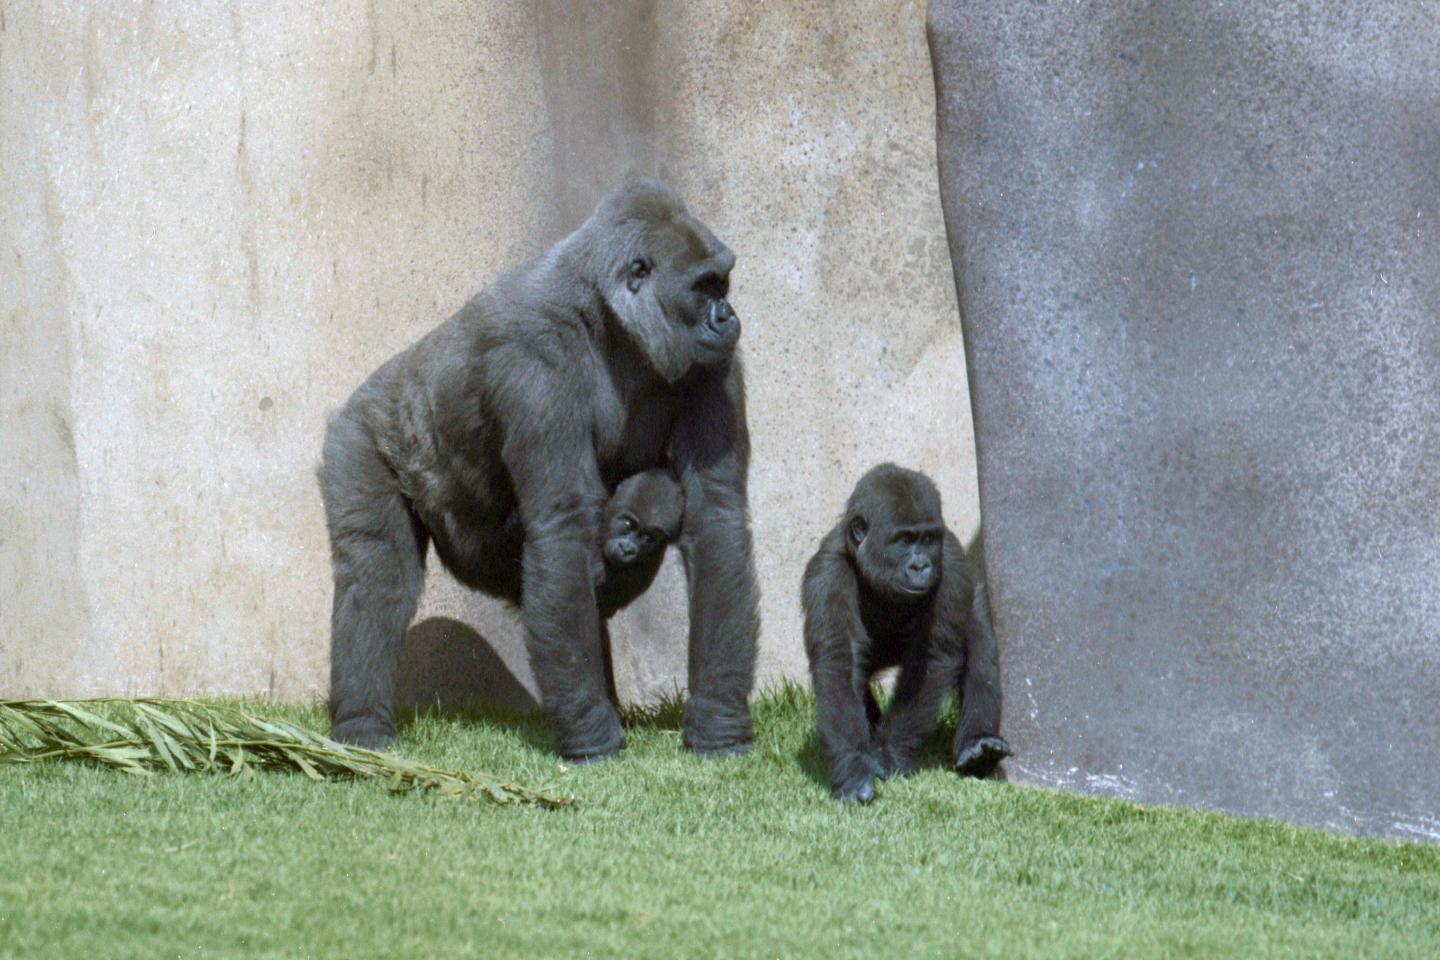 New Method Reveals High Similarity Between Gorilla And Human Y Chromosome